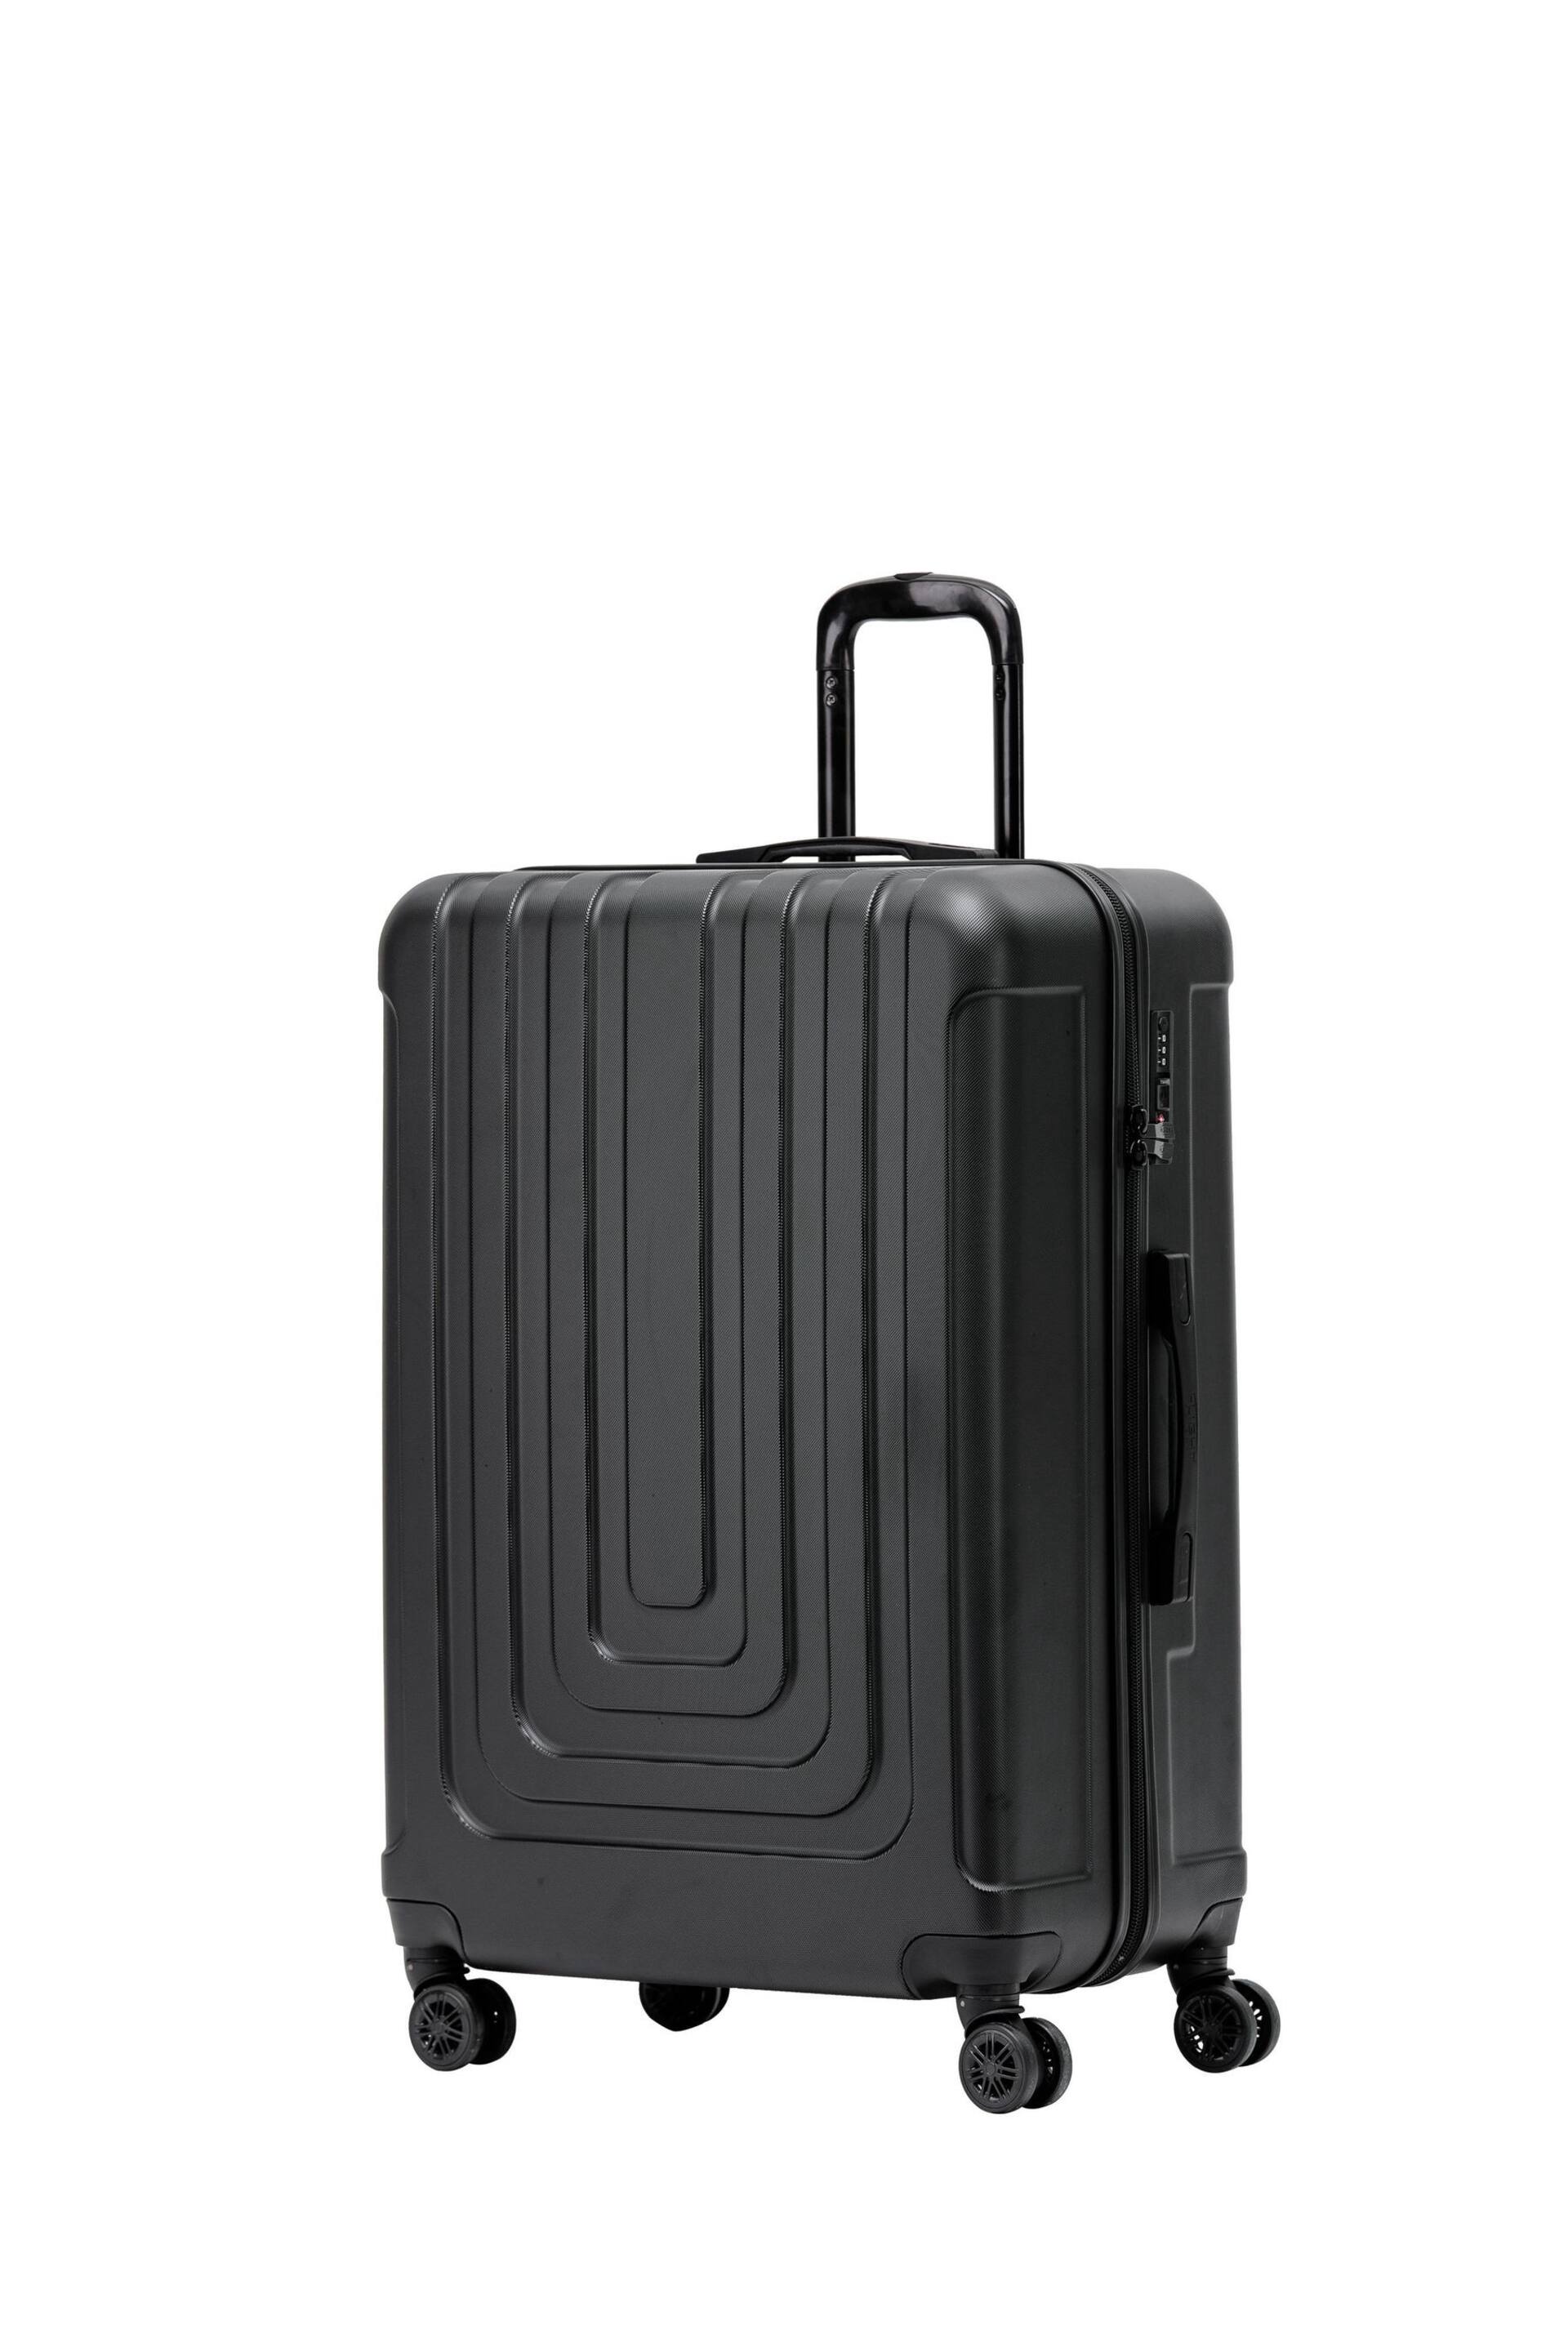 Flight Knight Large Hardcase Lightweight Check-In Black Suitcase With 4 Wheels - Image 1 of 3